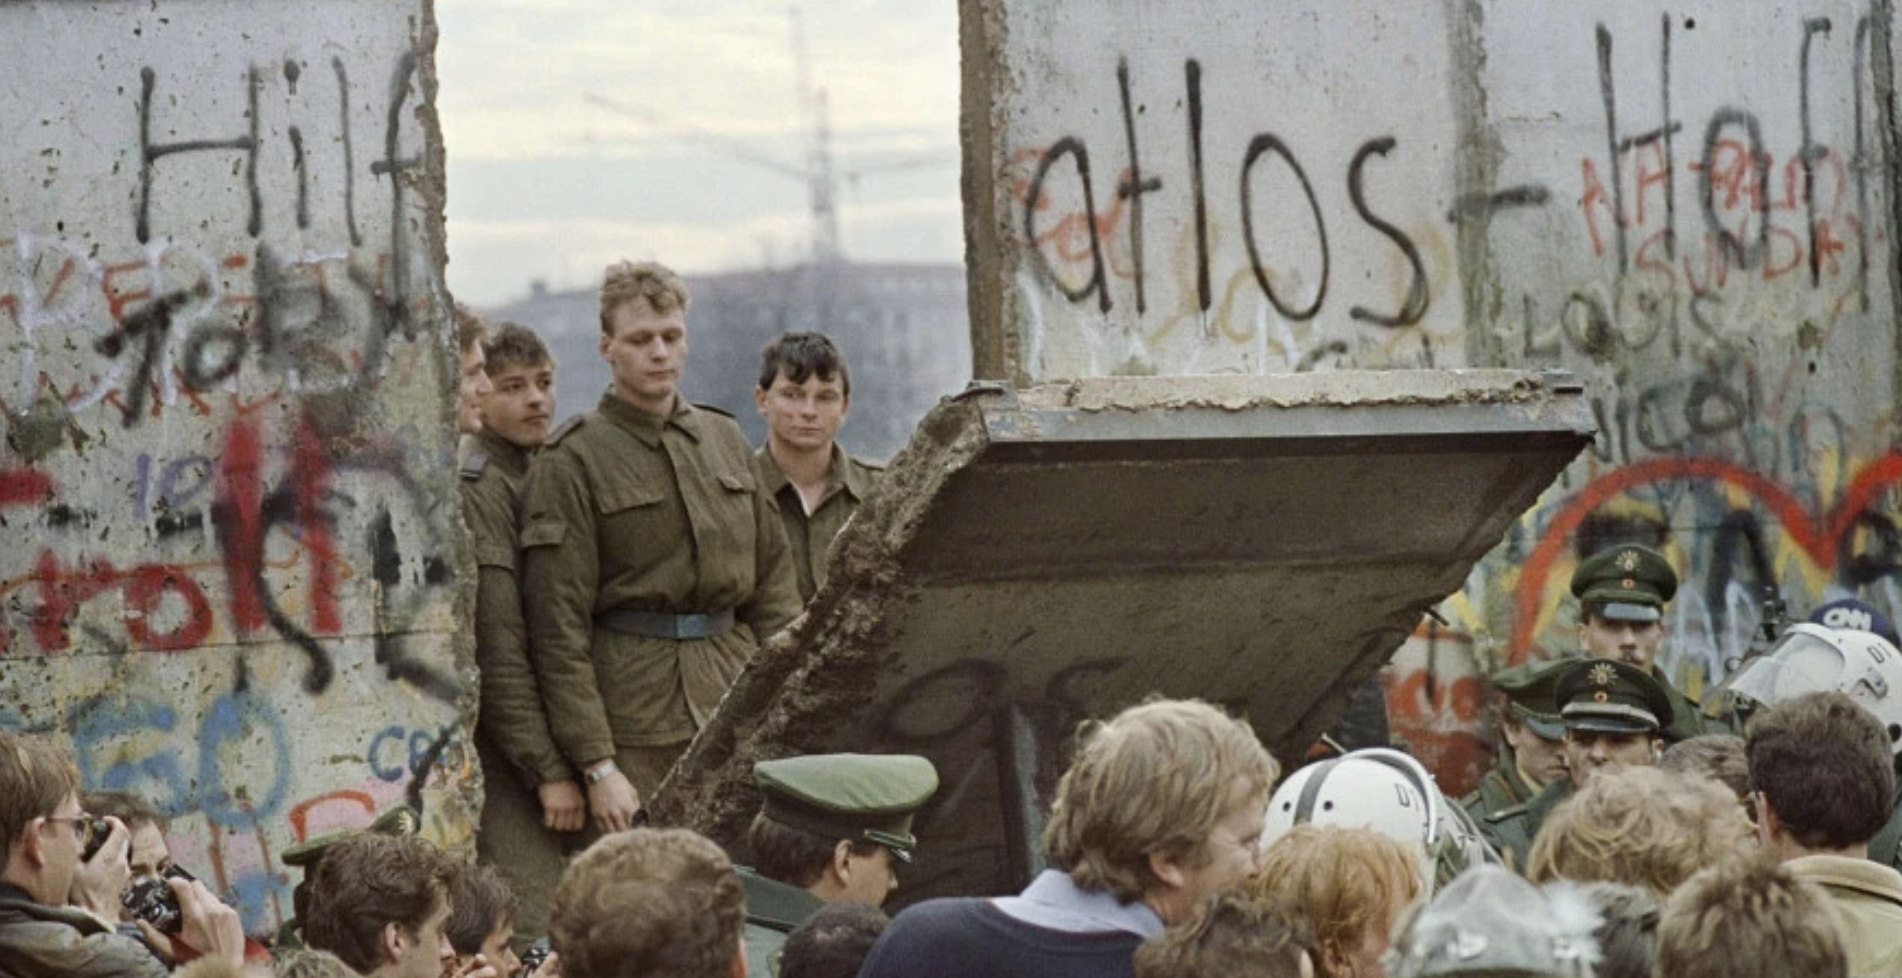 Toppled: The Accidental Opening of the Berlin Wall ‹ Literary Hub